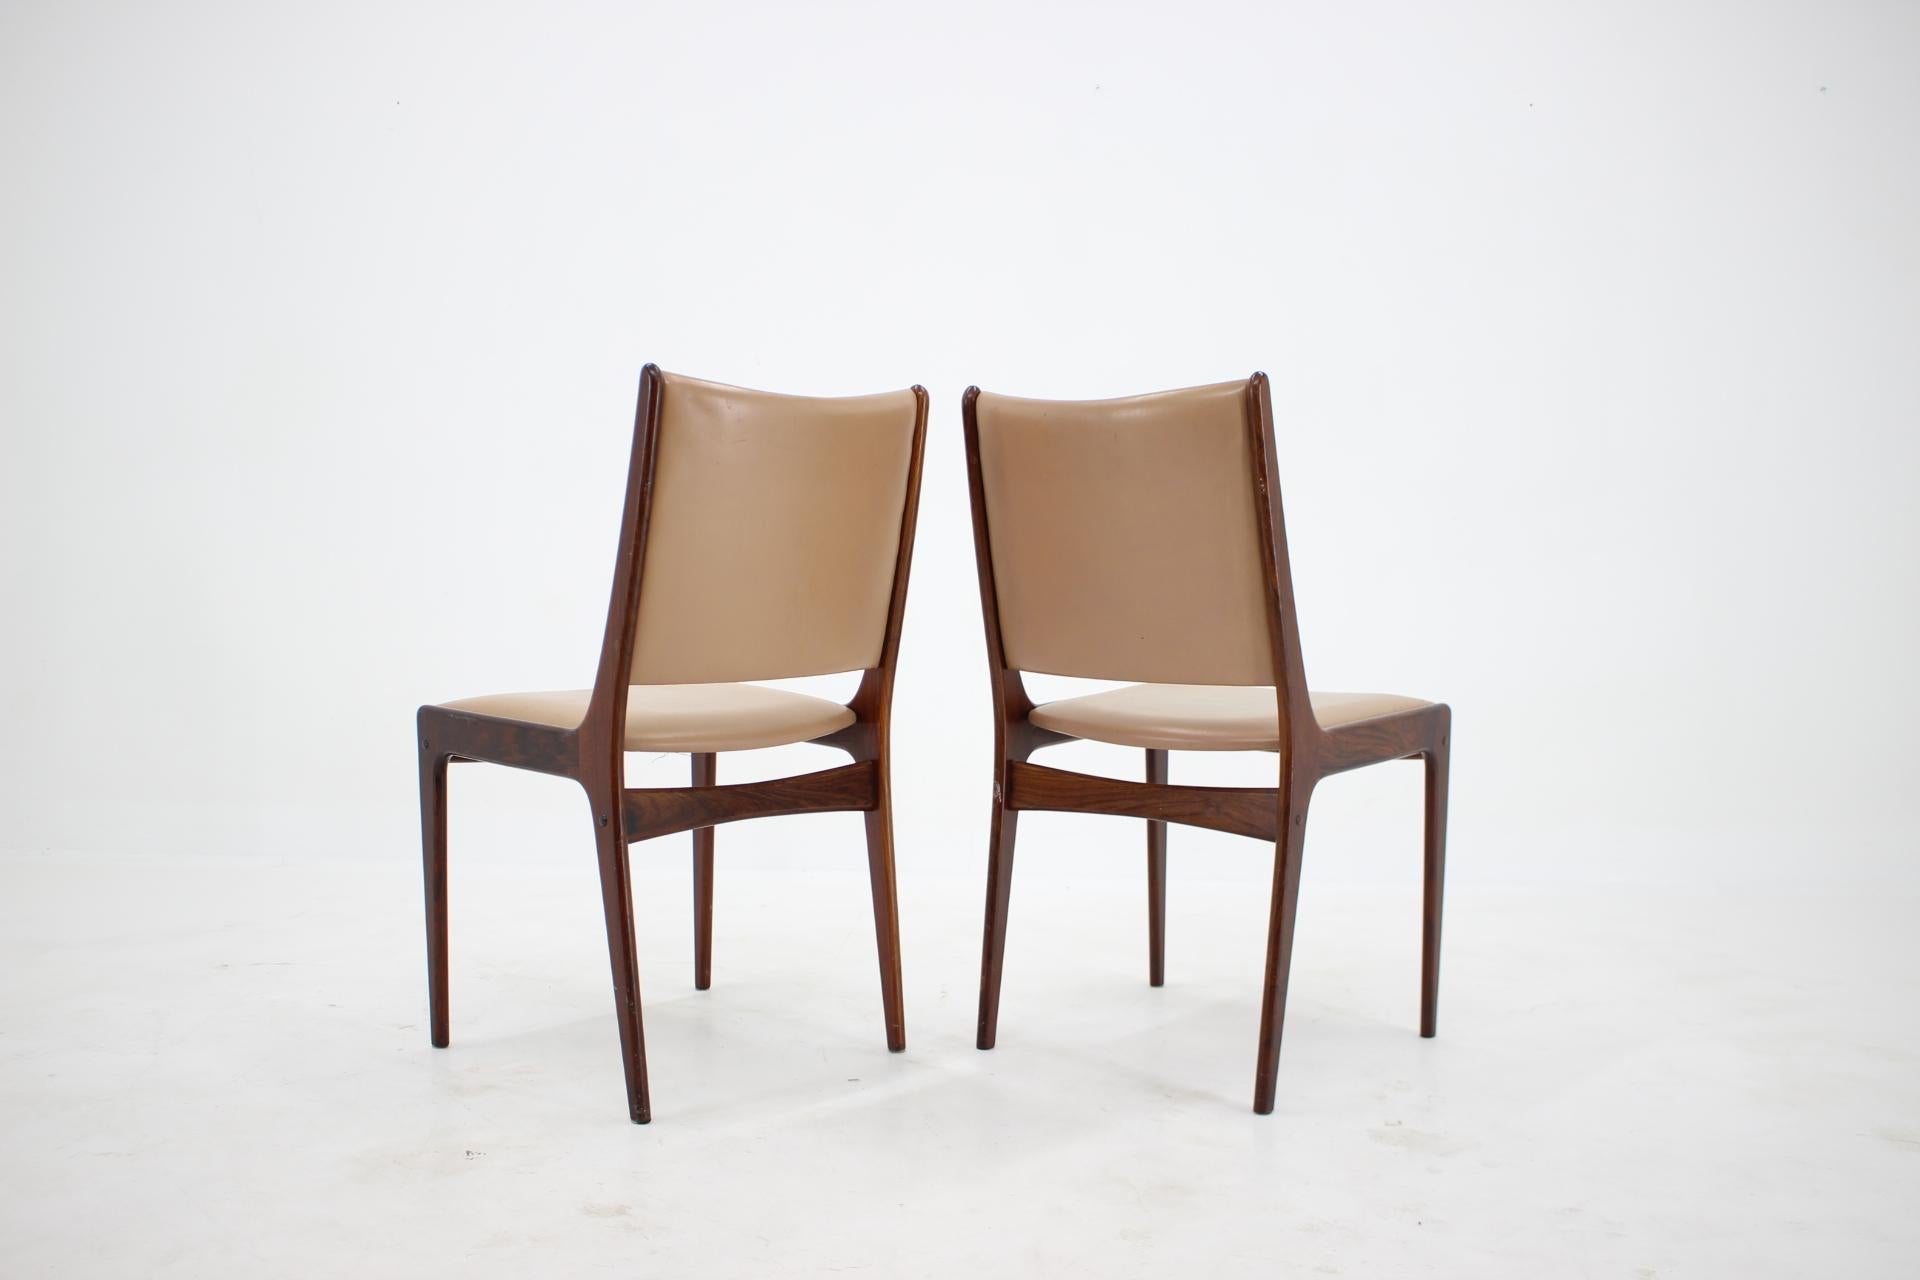 1960s Johannes Andersen Teak Dining Chairs in Leatherette, Set of 4 2